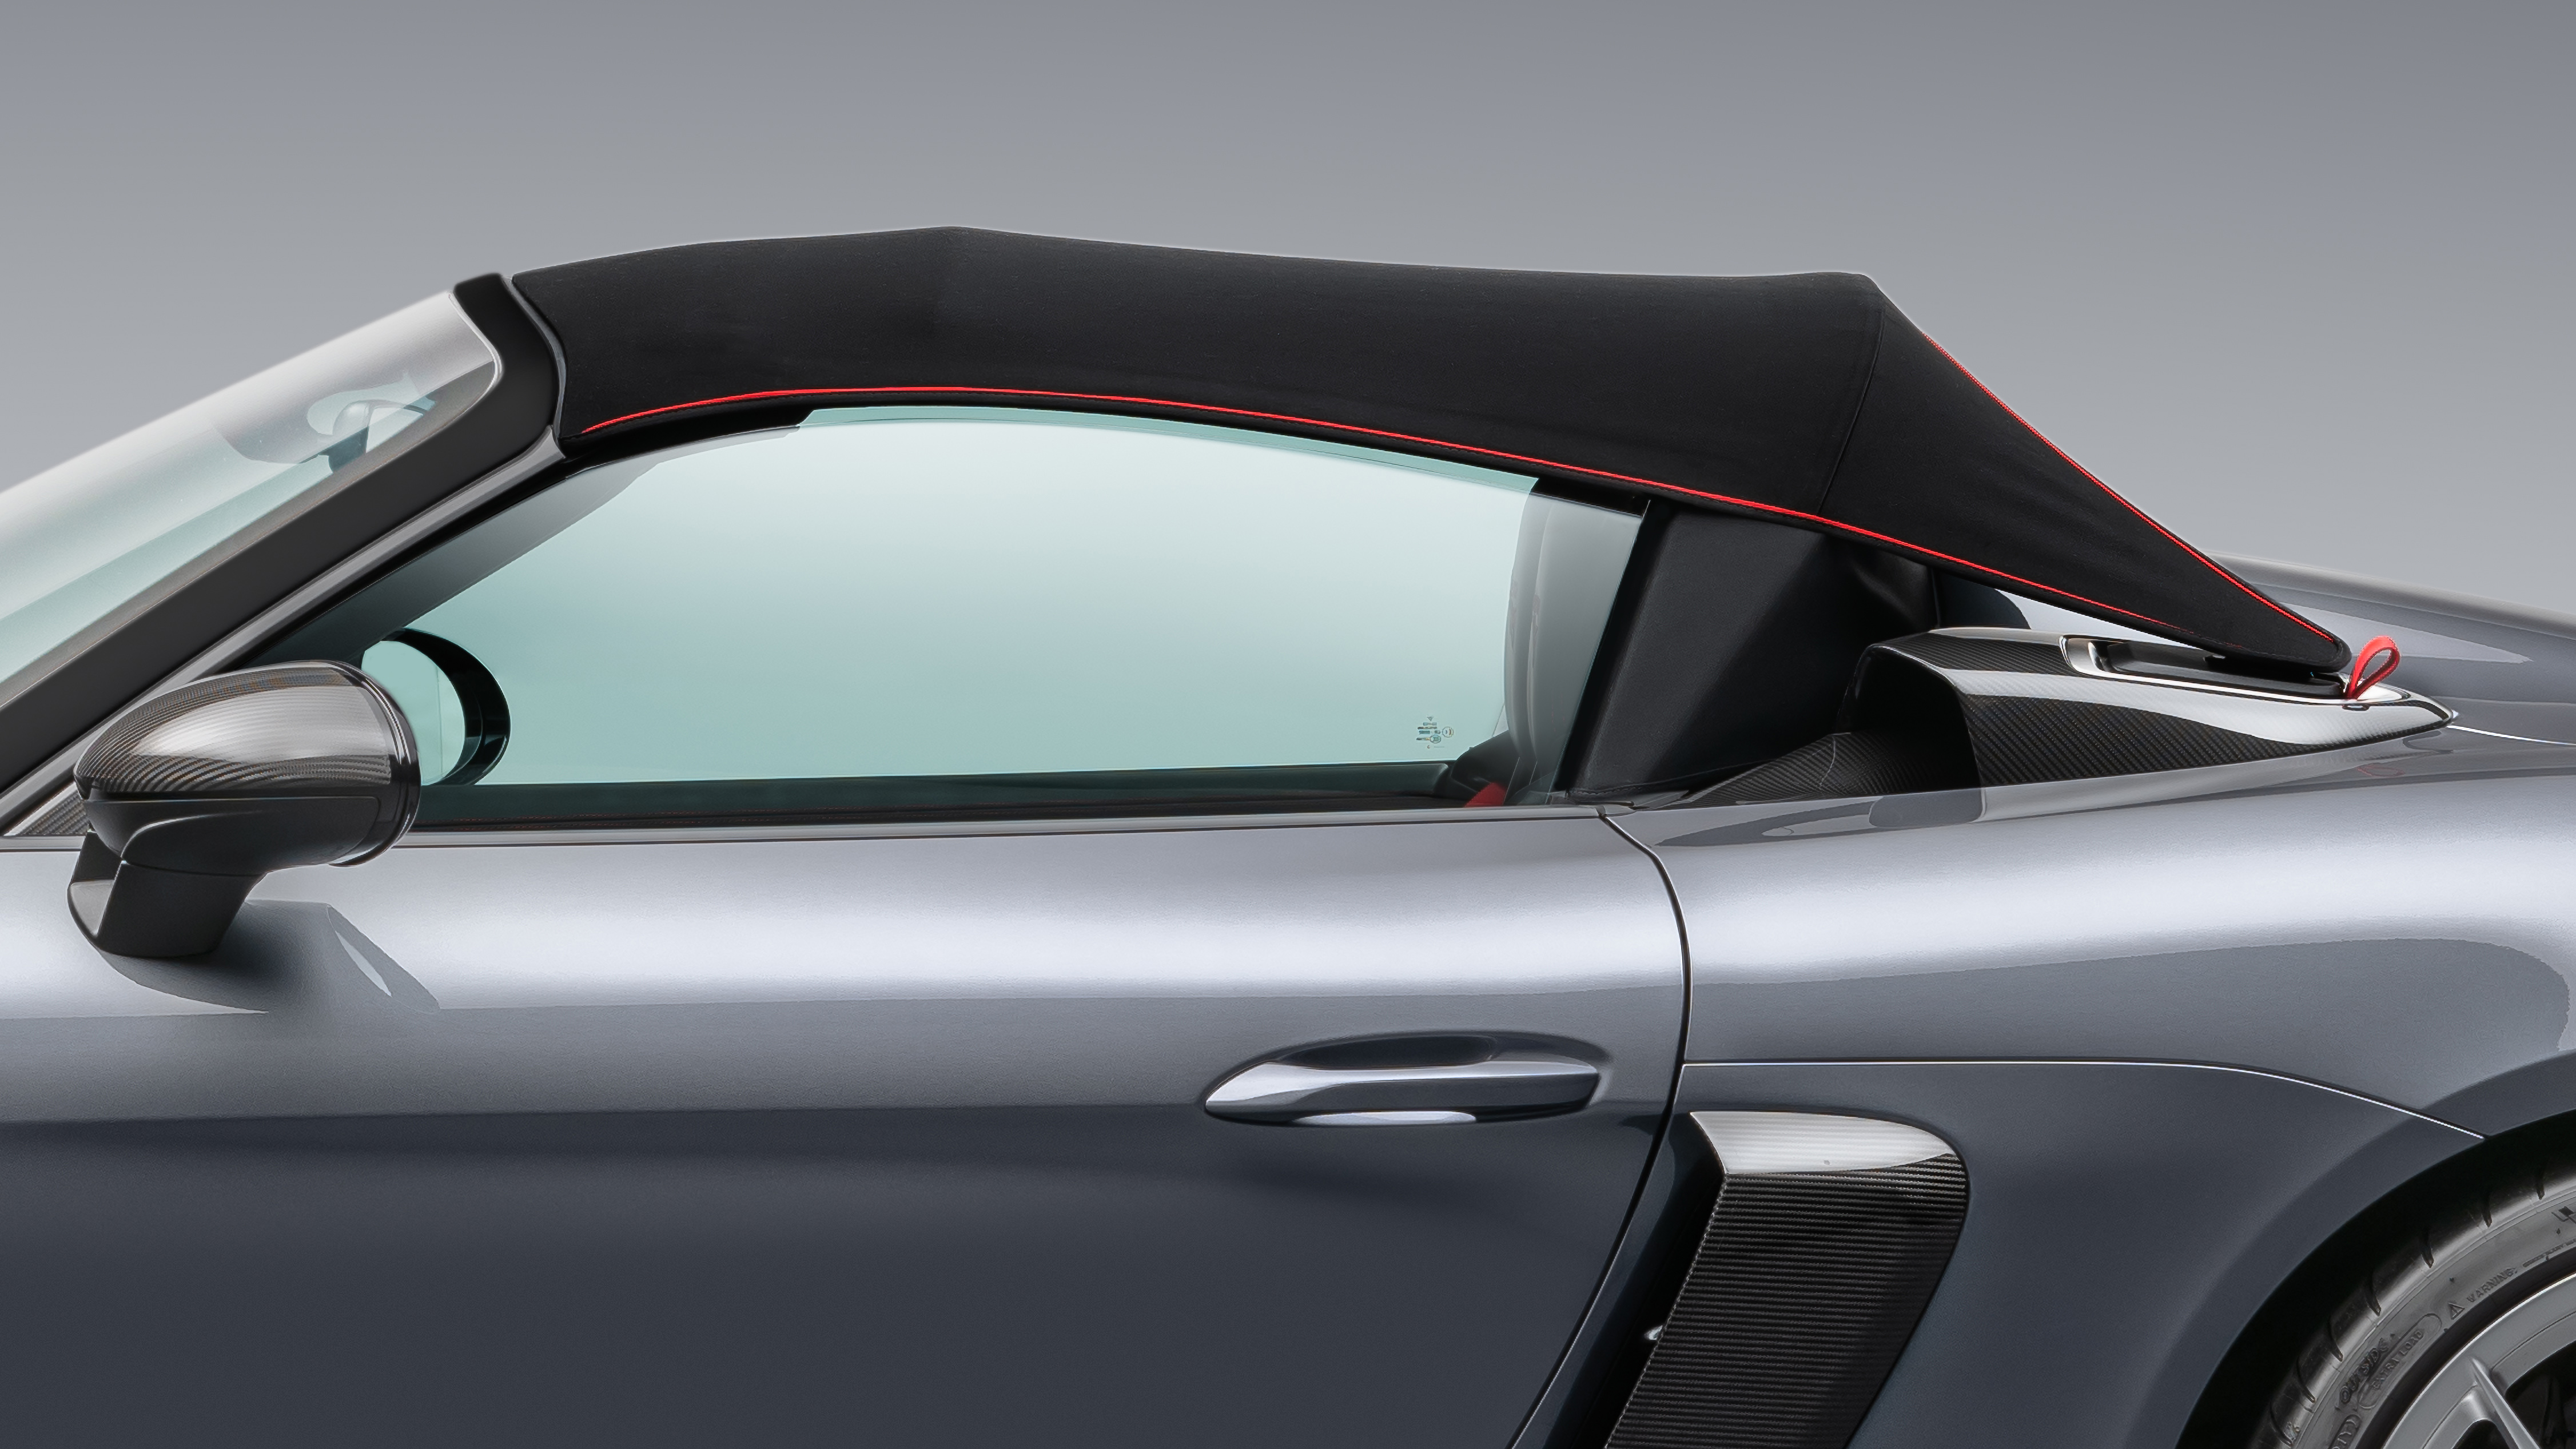 Manually operated roof of the Porsche 718 Spyder RS